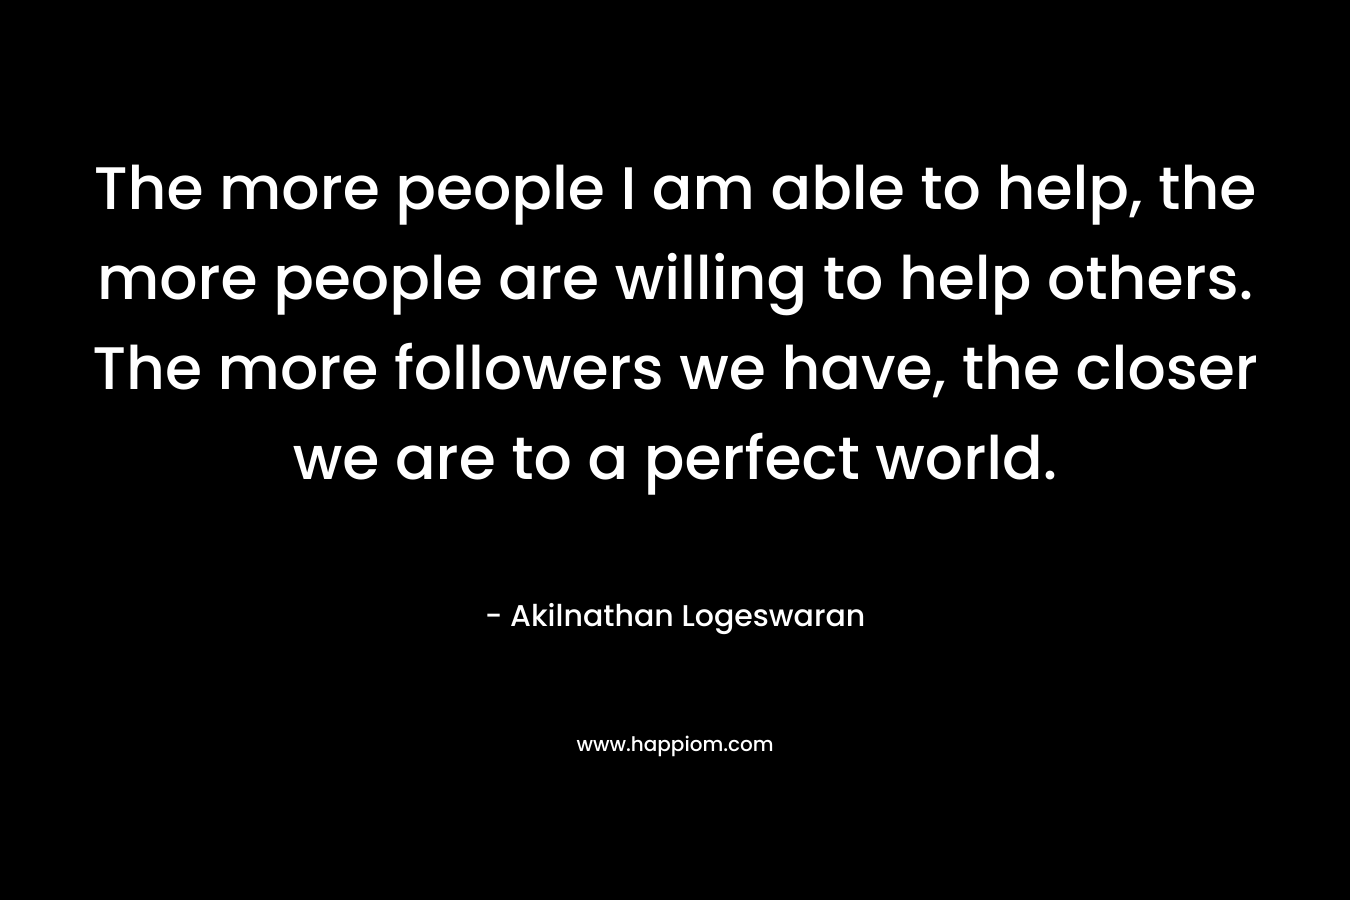 The more people I am able to help, the more people are willing to help others. The more followers we have, the closer we are to a perfect world.